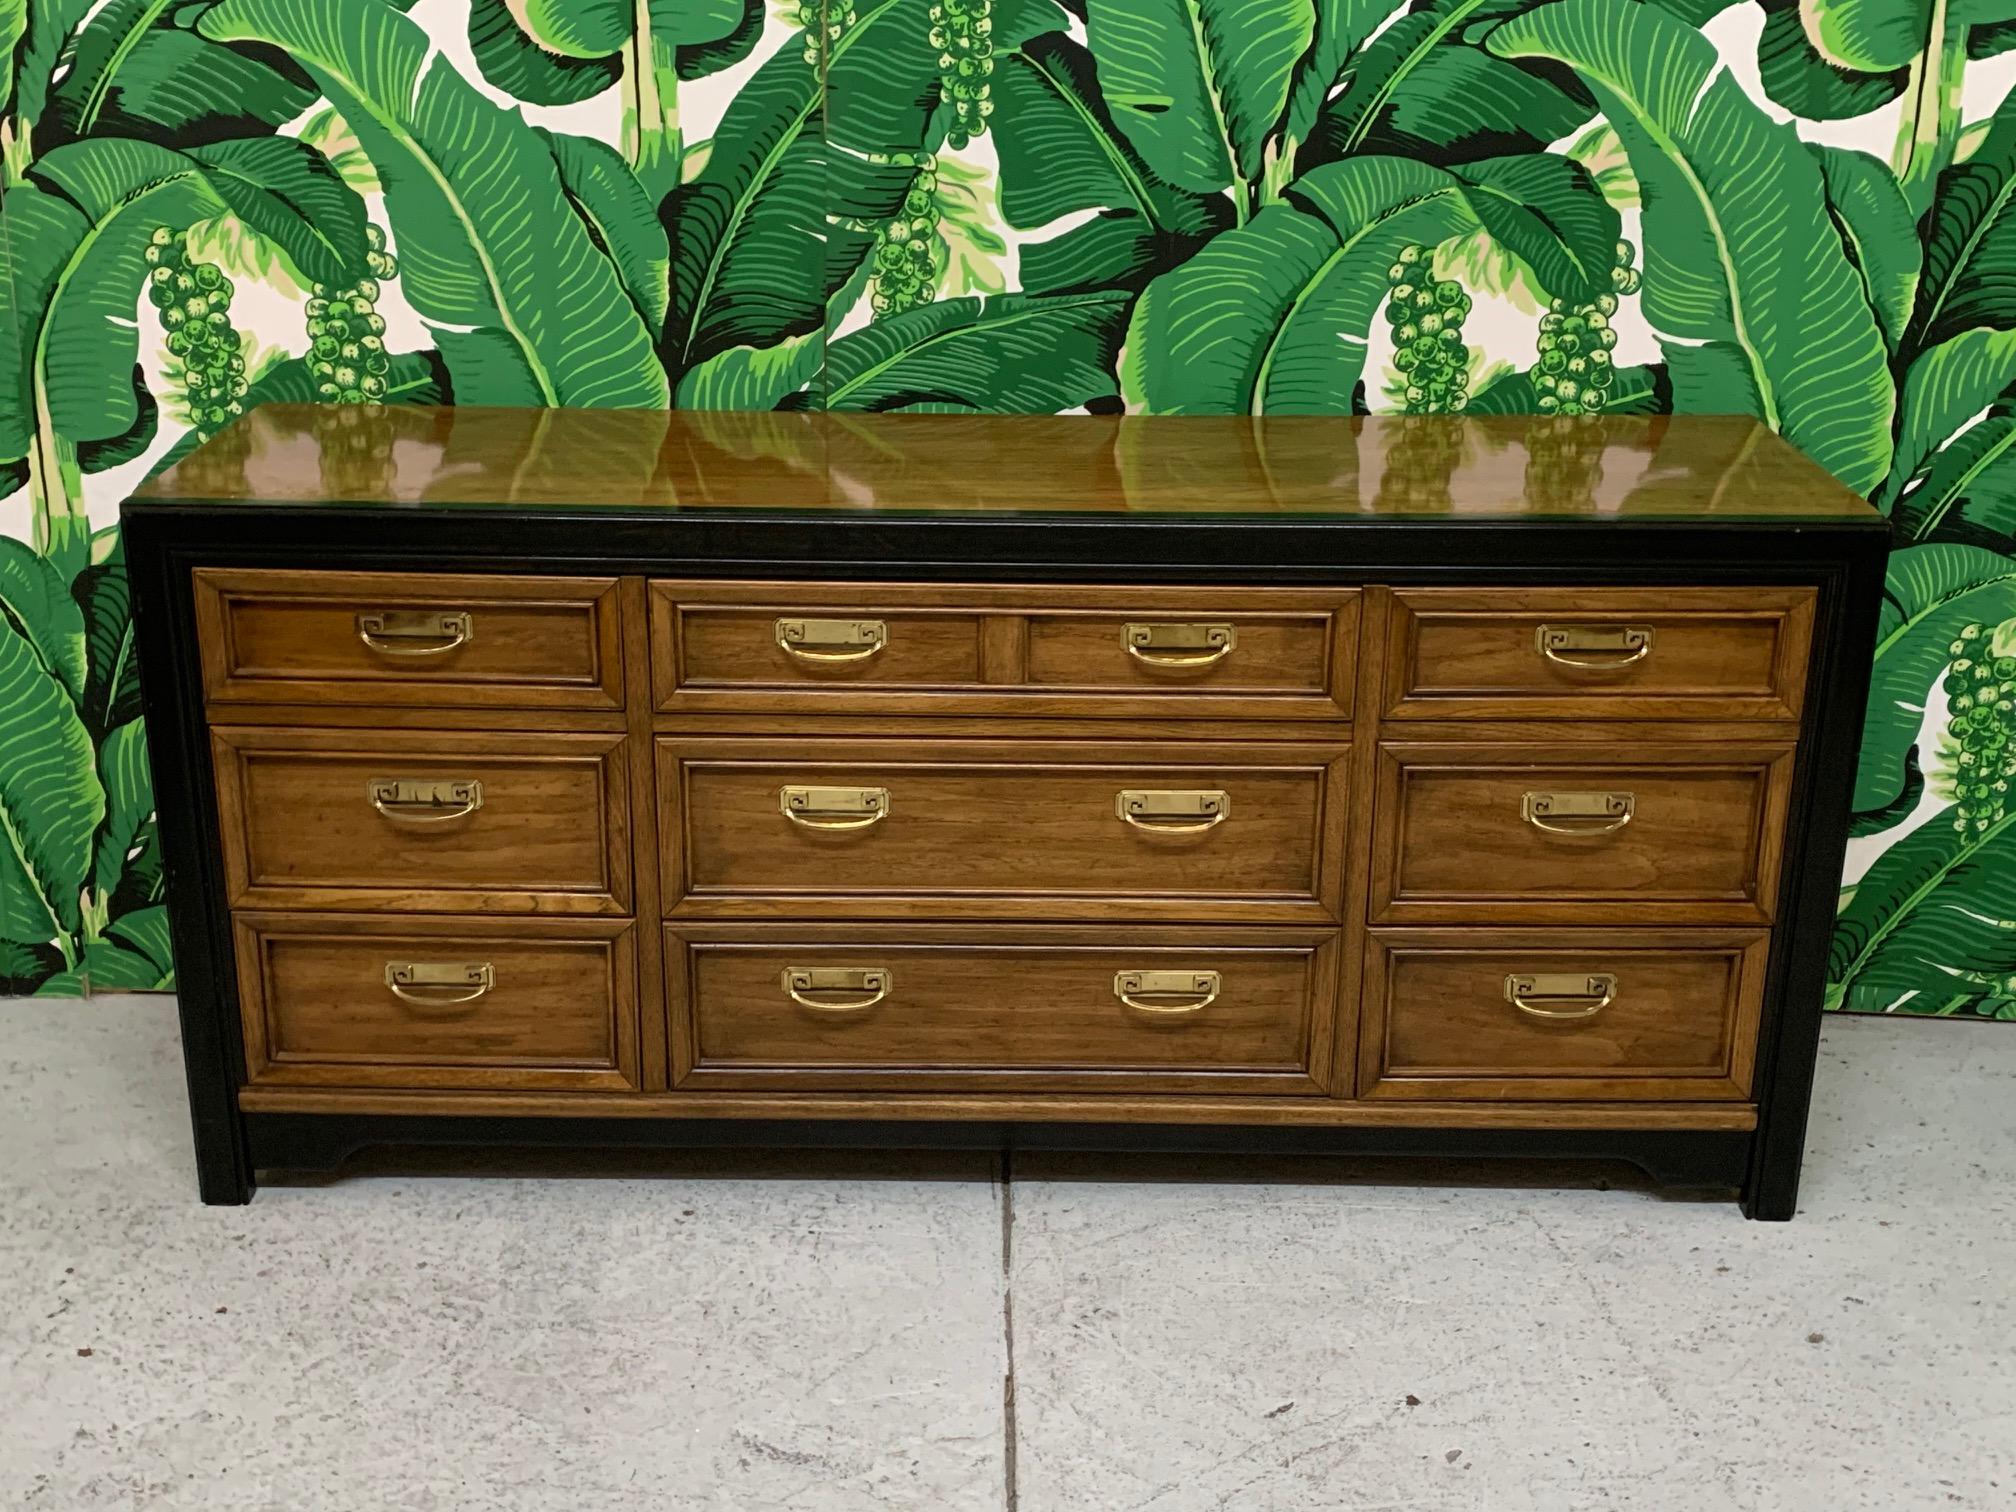 Triple dresser by Thomasville features two-tone finish and brass hardware. Very good condition with minor imperfections consistent with age.